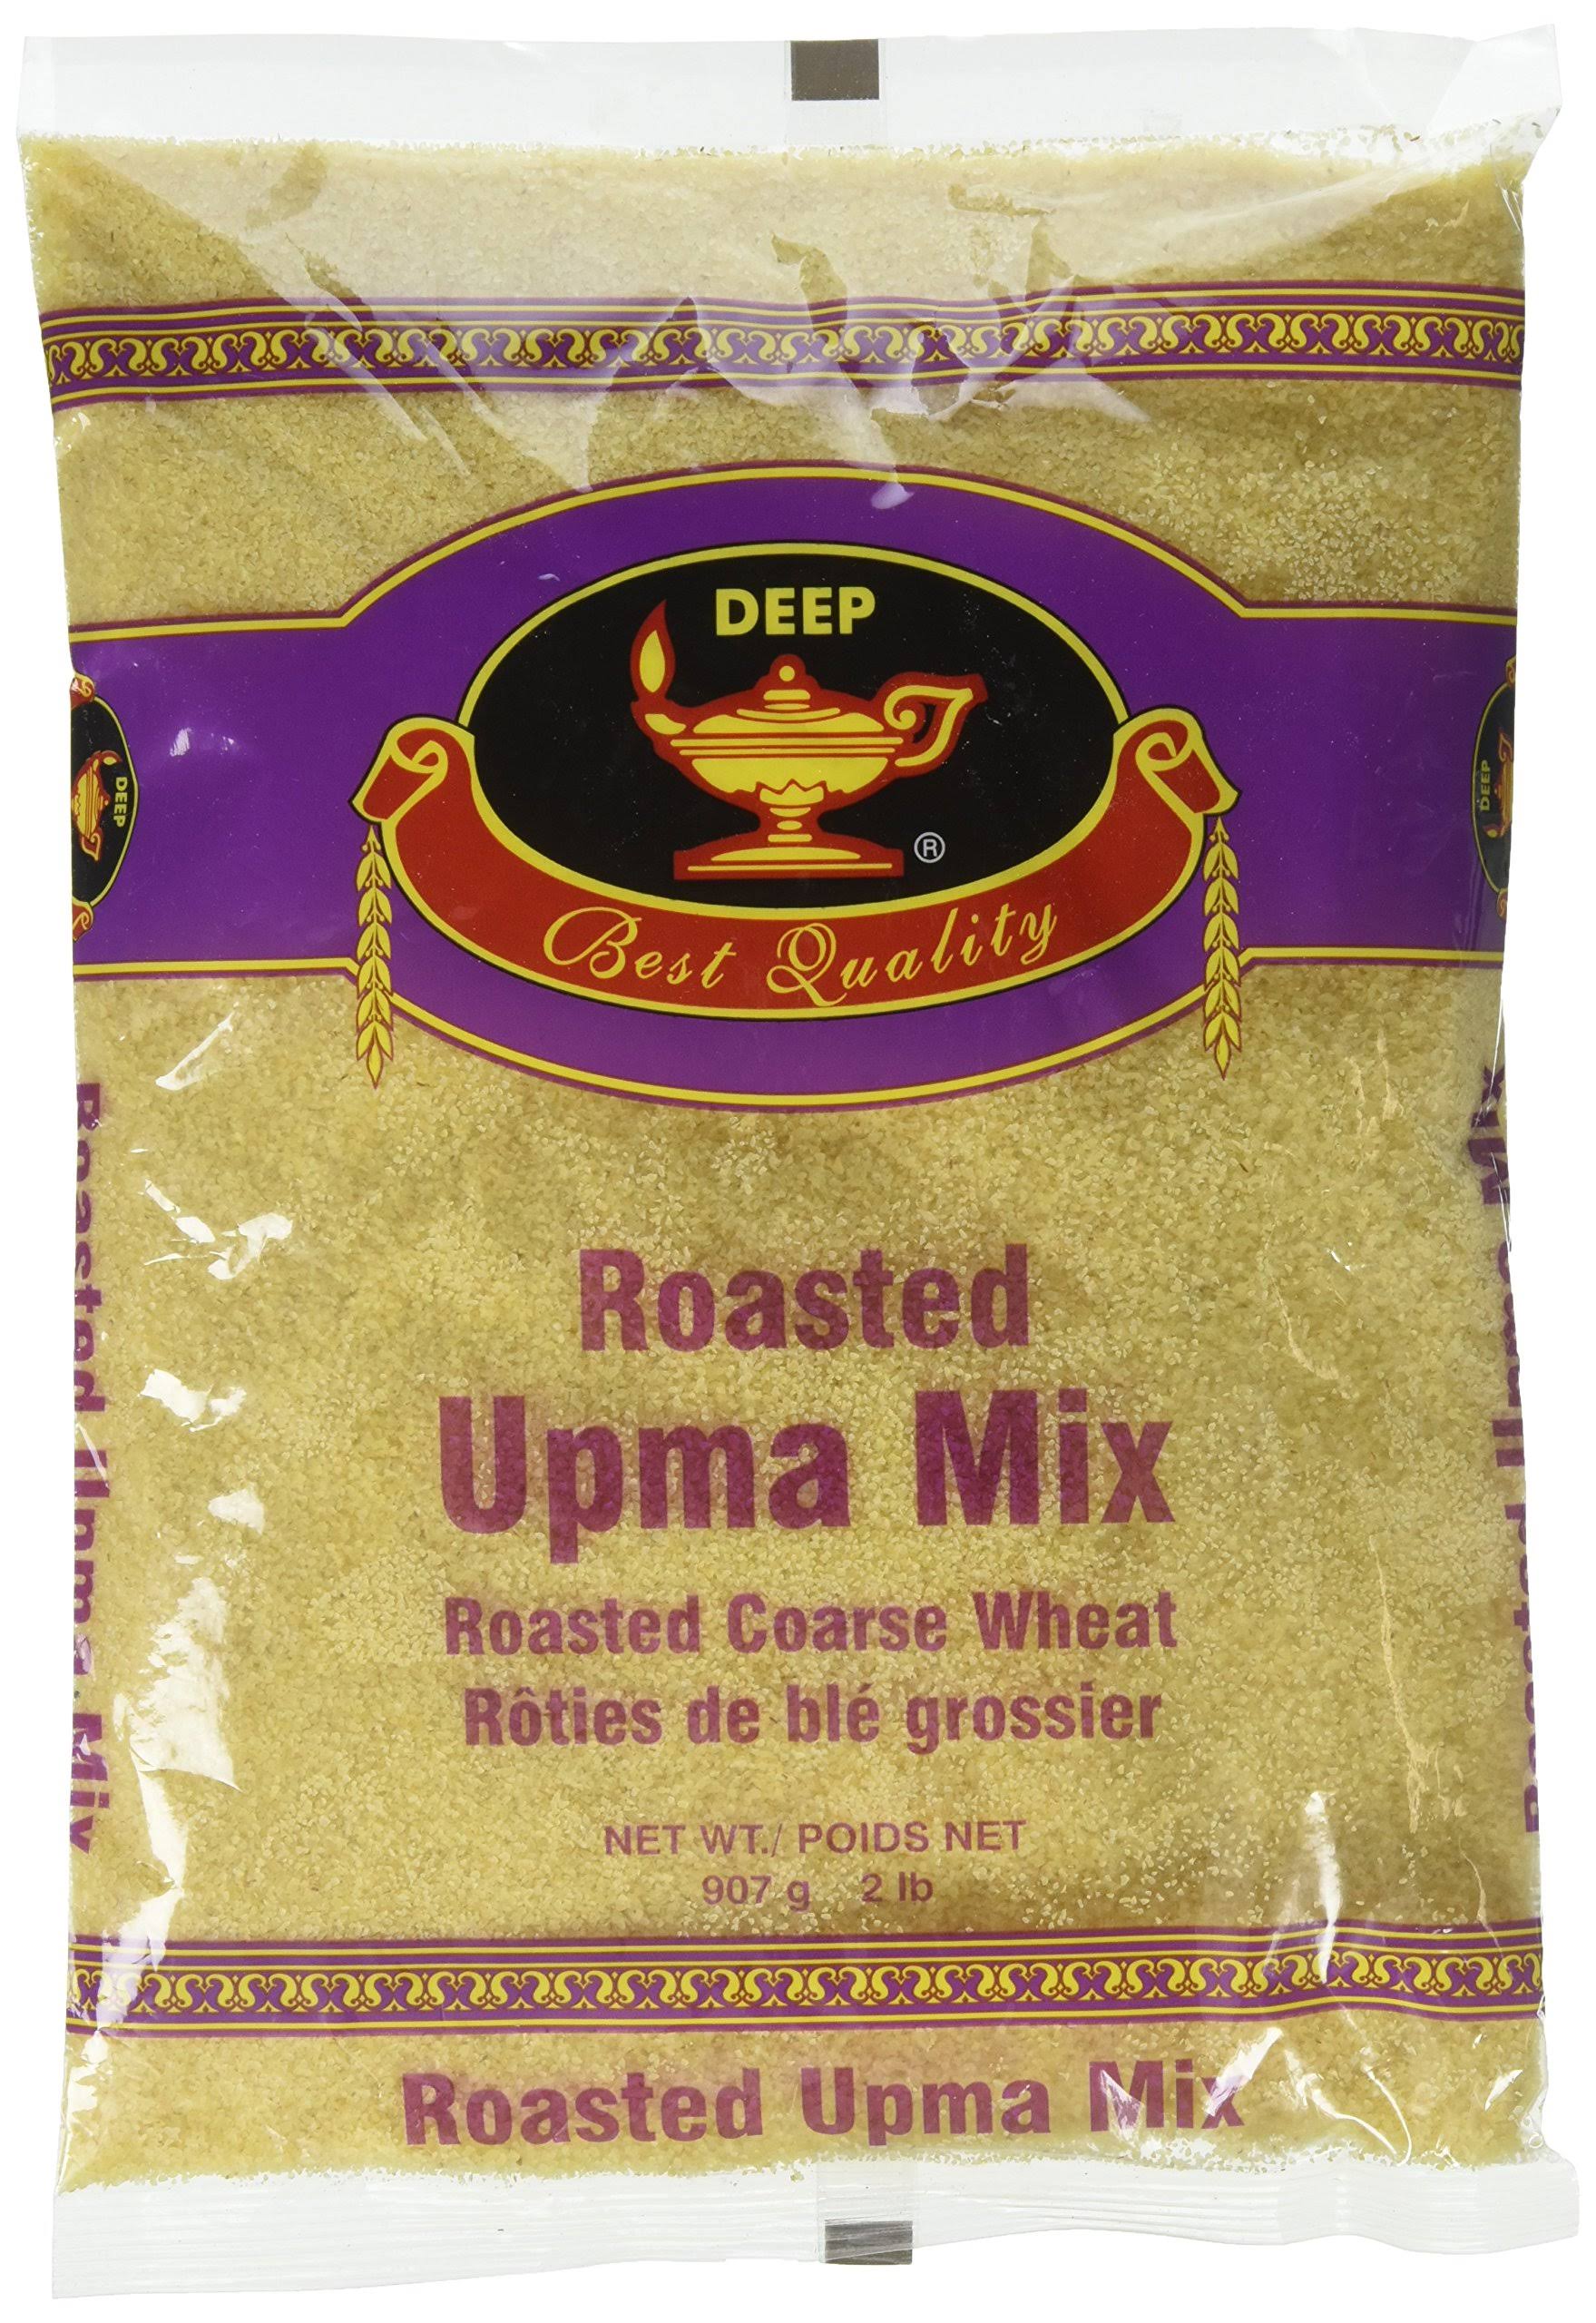 Deep Roasted Upma Mix 2lb - Meal Kit Delivery Serivce - Cartly